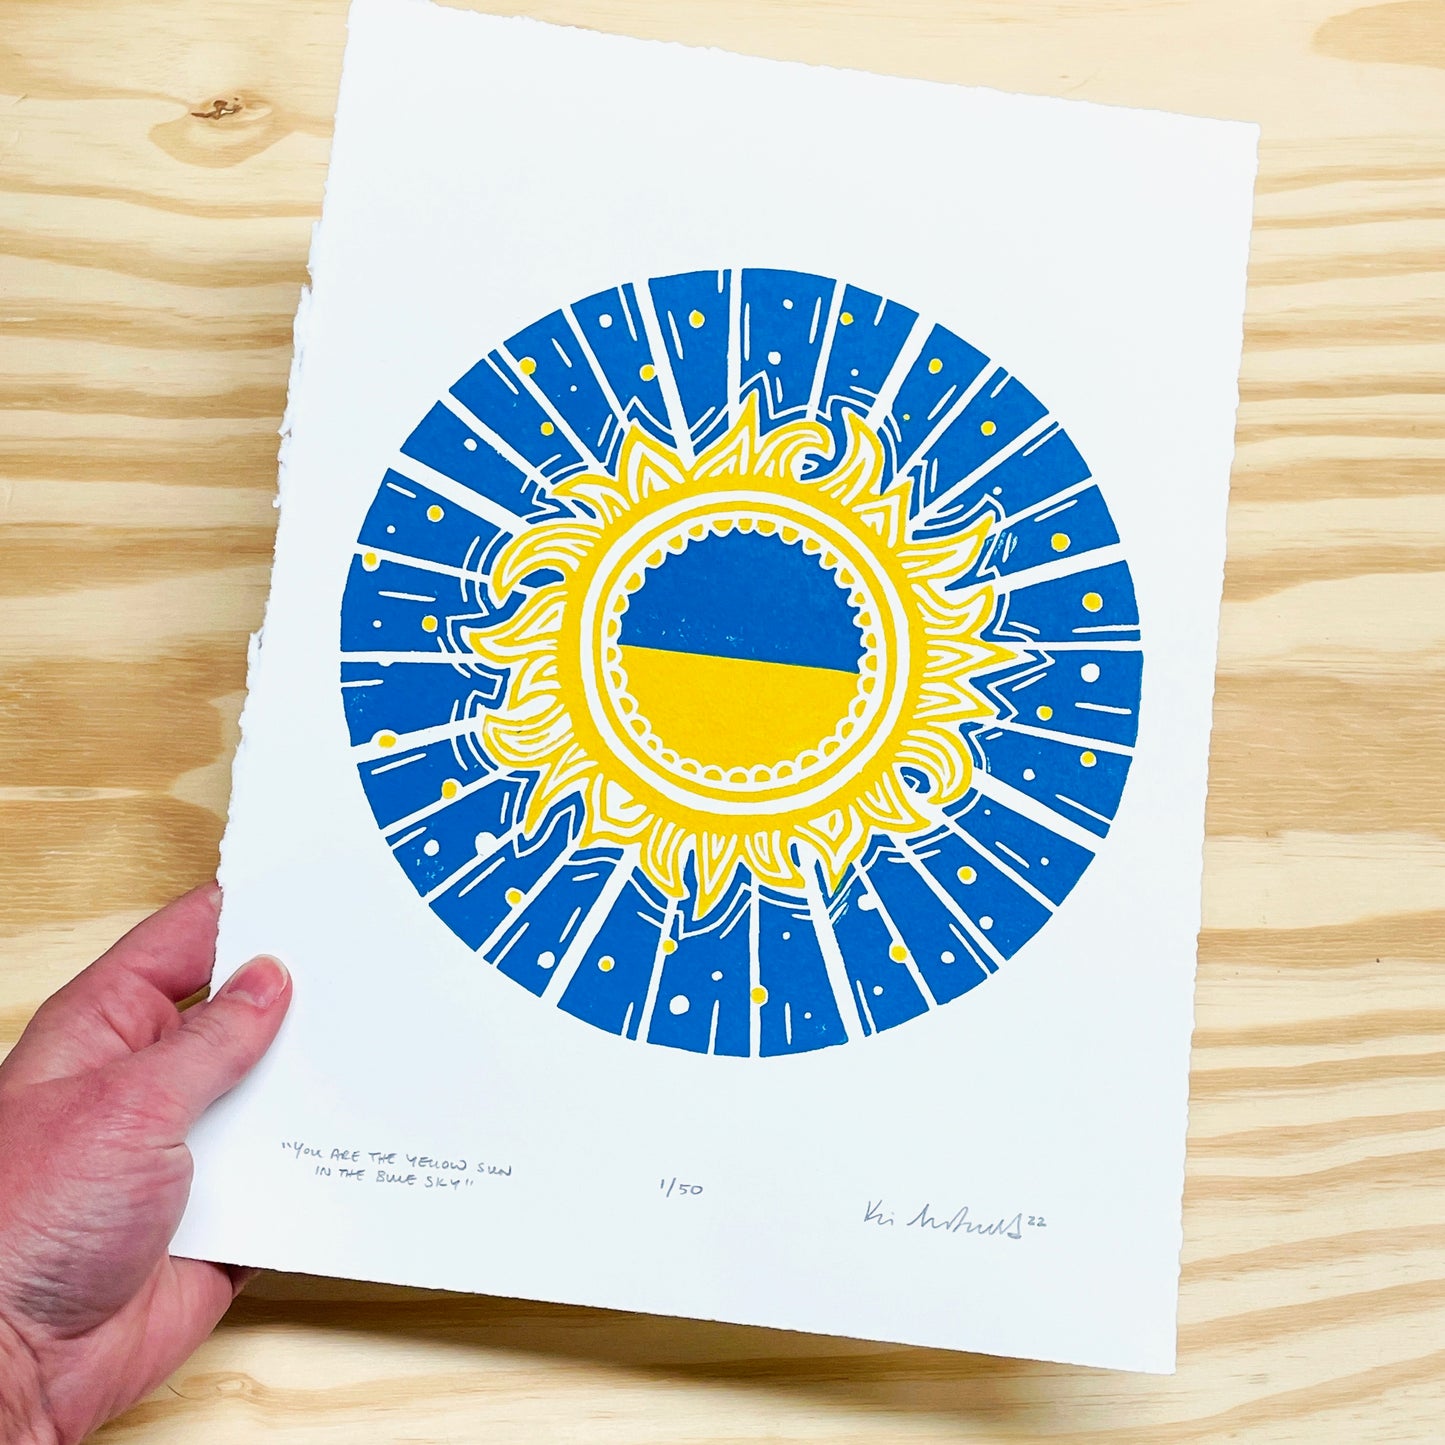 You Are the Yellow Sun in the Blue Sky - Brovary, Ukraine Fundraiser woodblock print (9x12")